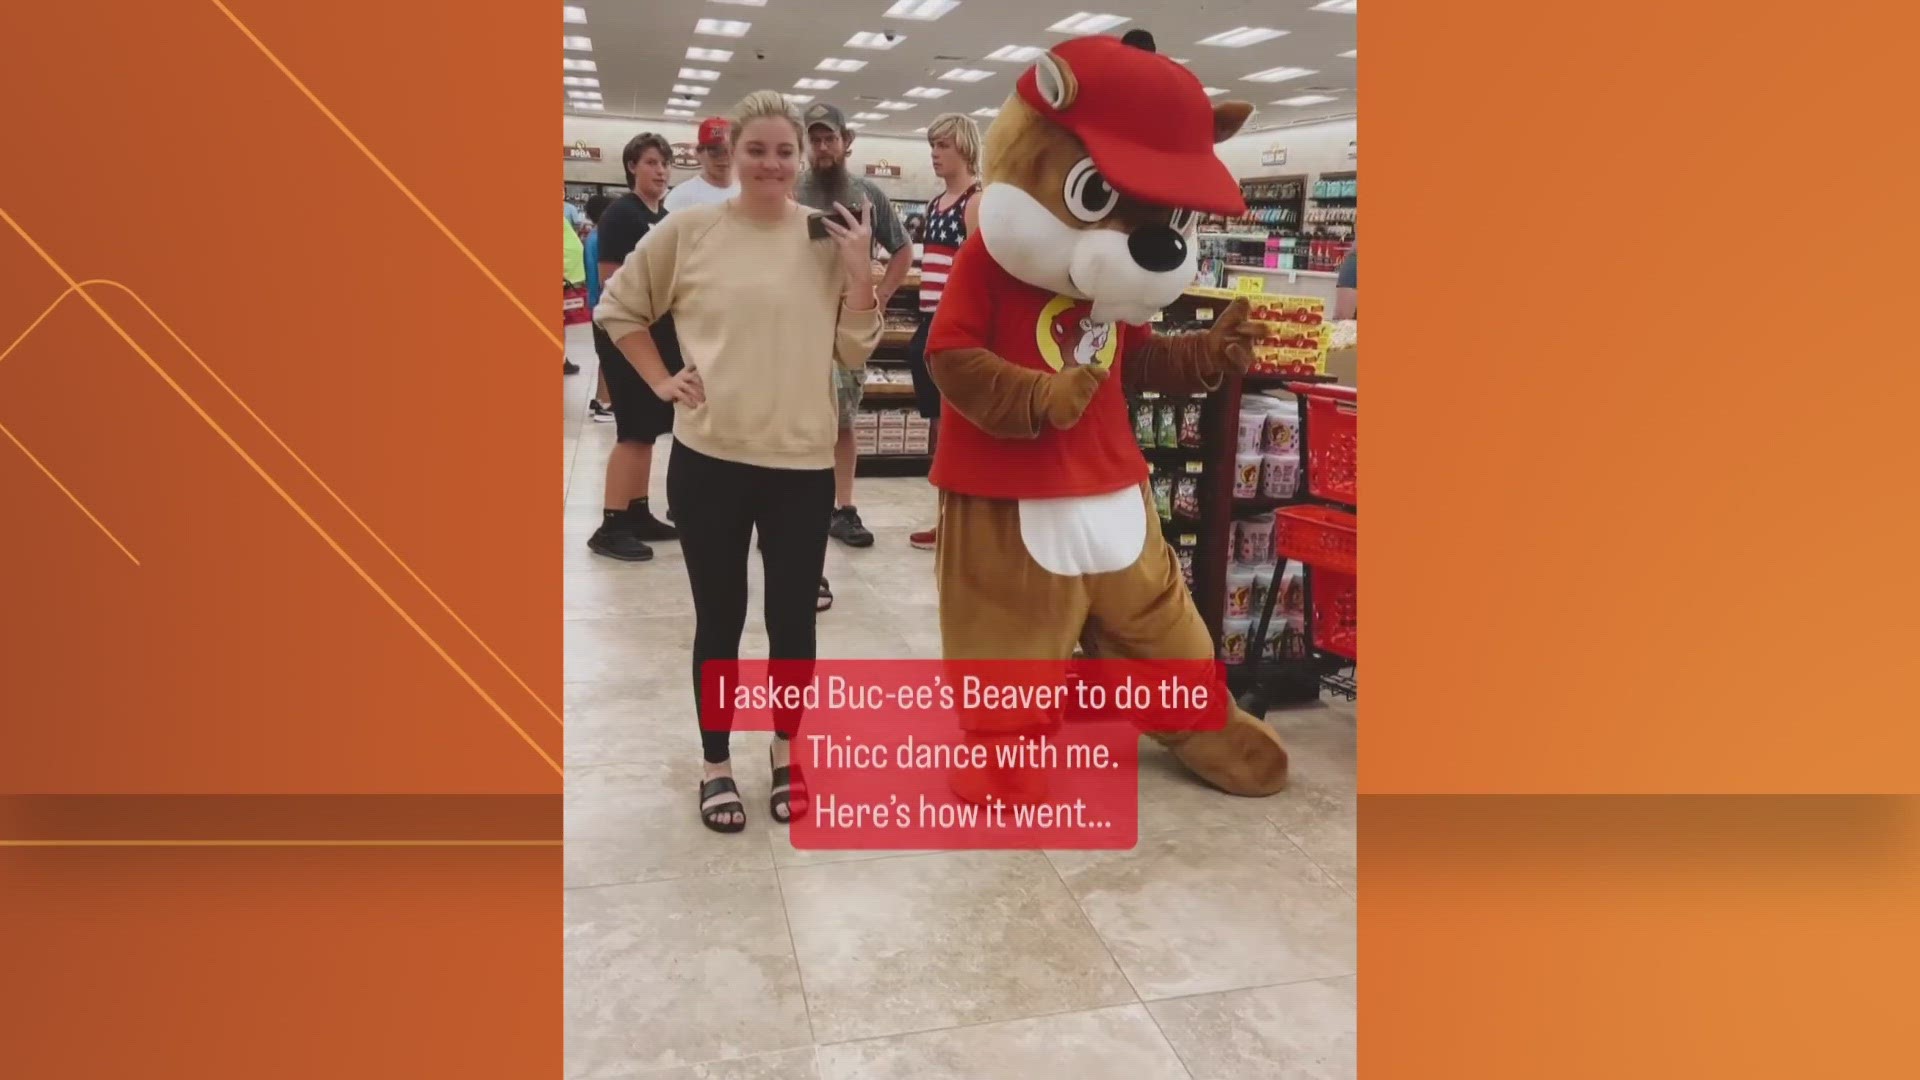 Lauren Alaina shared video of a recent stop at Buc-ee’s where she taught the Buc-ee’s beaver her new viral dance.